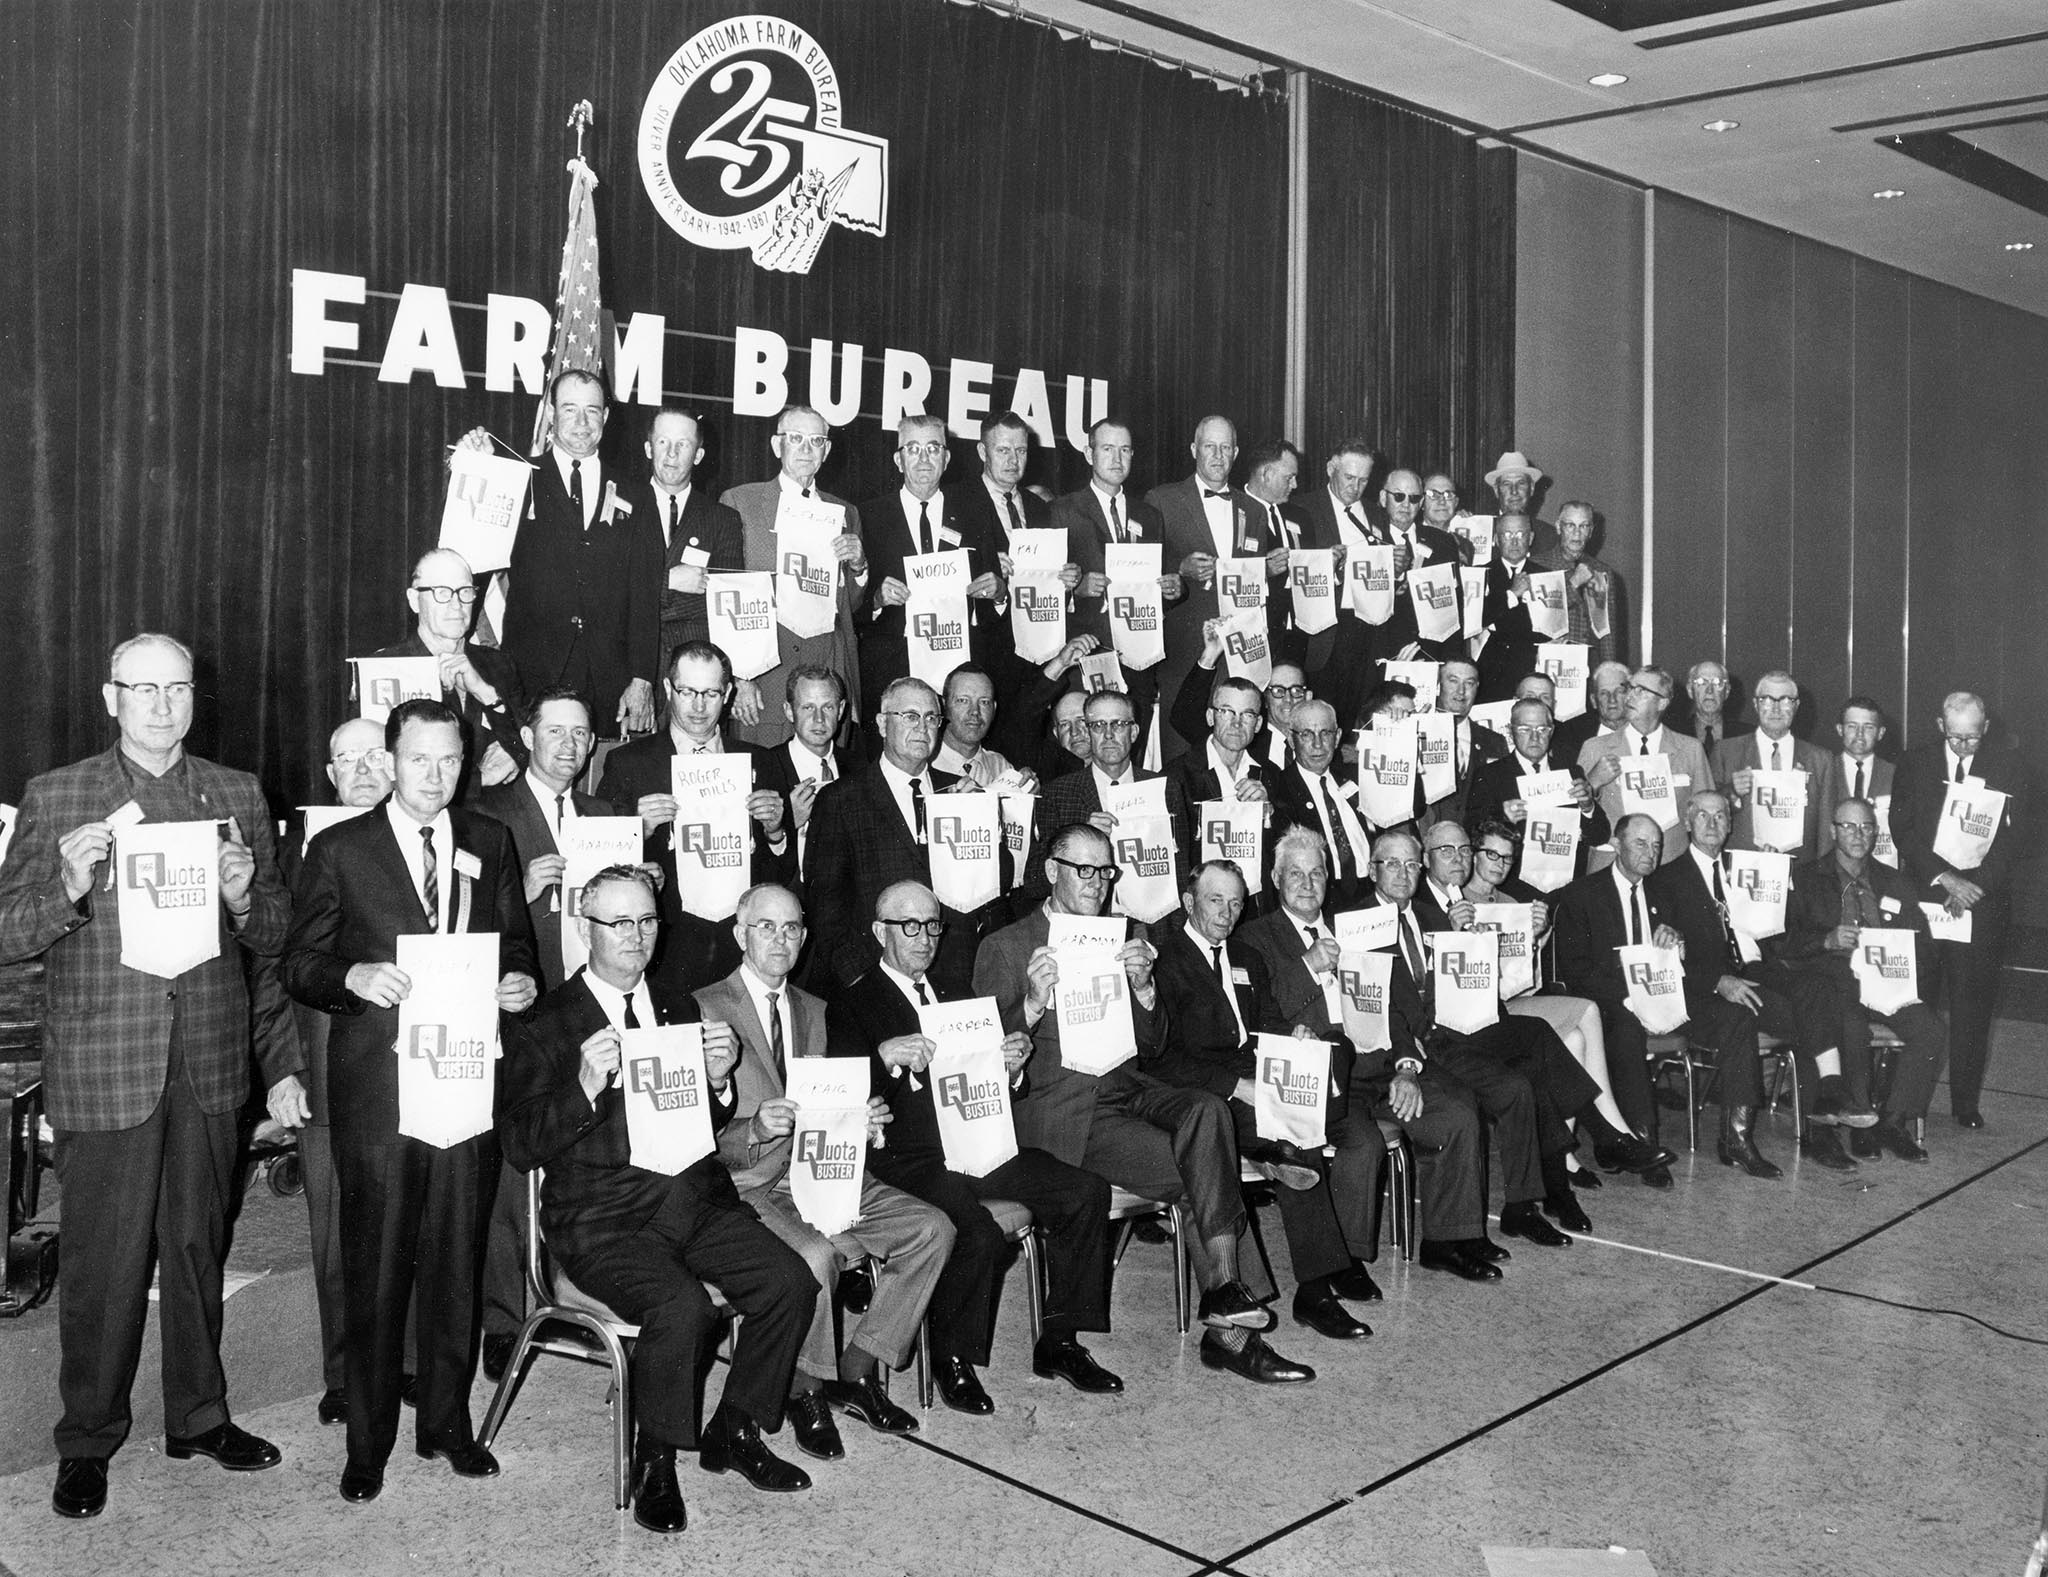 County Farm Bureaus were competitive in meeting their membership goals. Each county was encouraged to meet their county quota by renewing at least as many memberships as the previous year, plus one. Successful counties received an award at the annual Oklahoma Farm Bureau Convention. Pictured here are the 1967 “Quota Busters,” comprised of representatives from counties that made their membership quotas. A total of 70 counties reached quota in 1967, setting a new all-time high for state membership by adding 6,000 more members than the previous year.